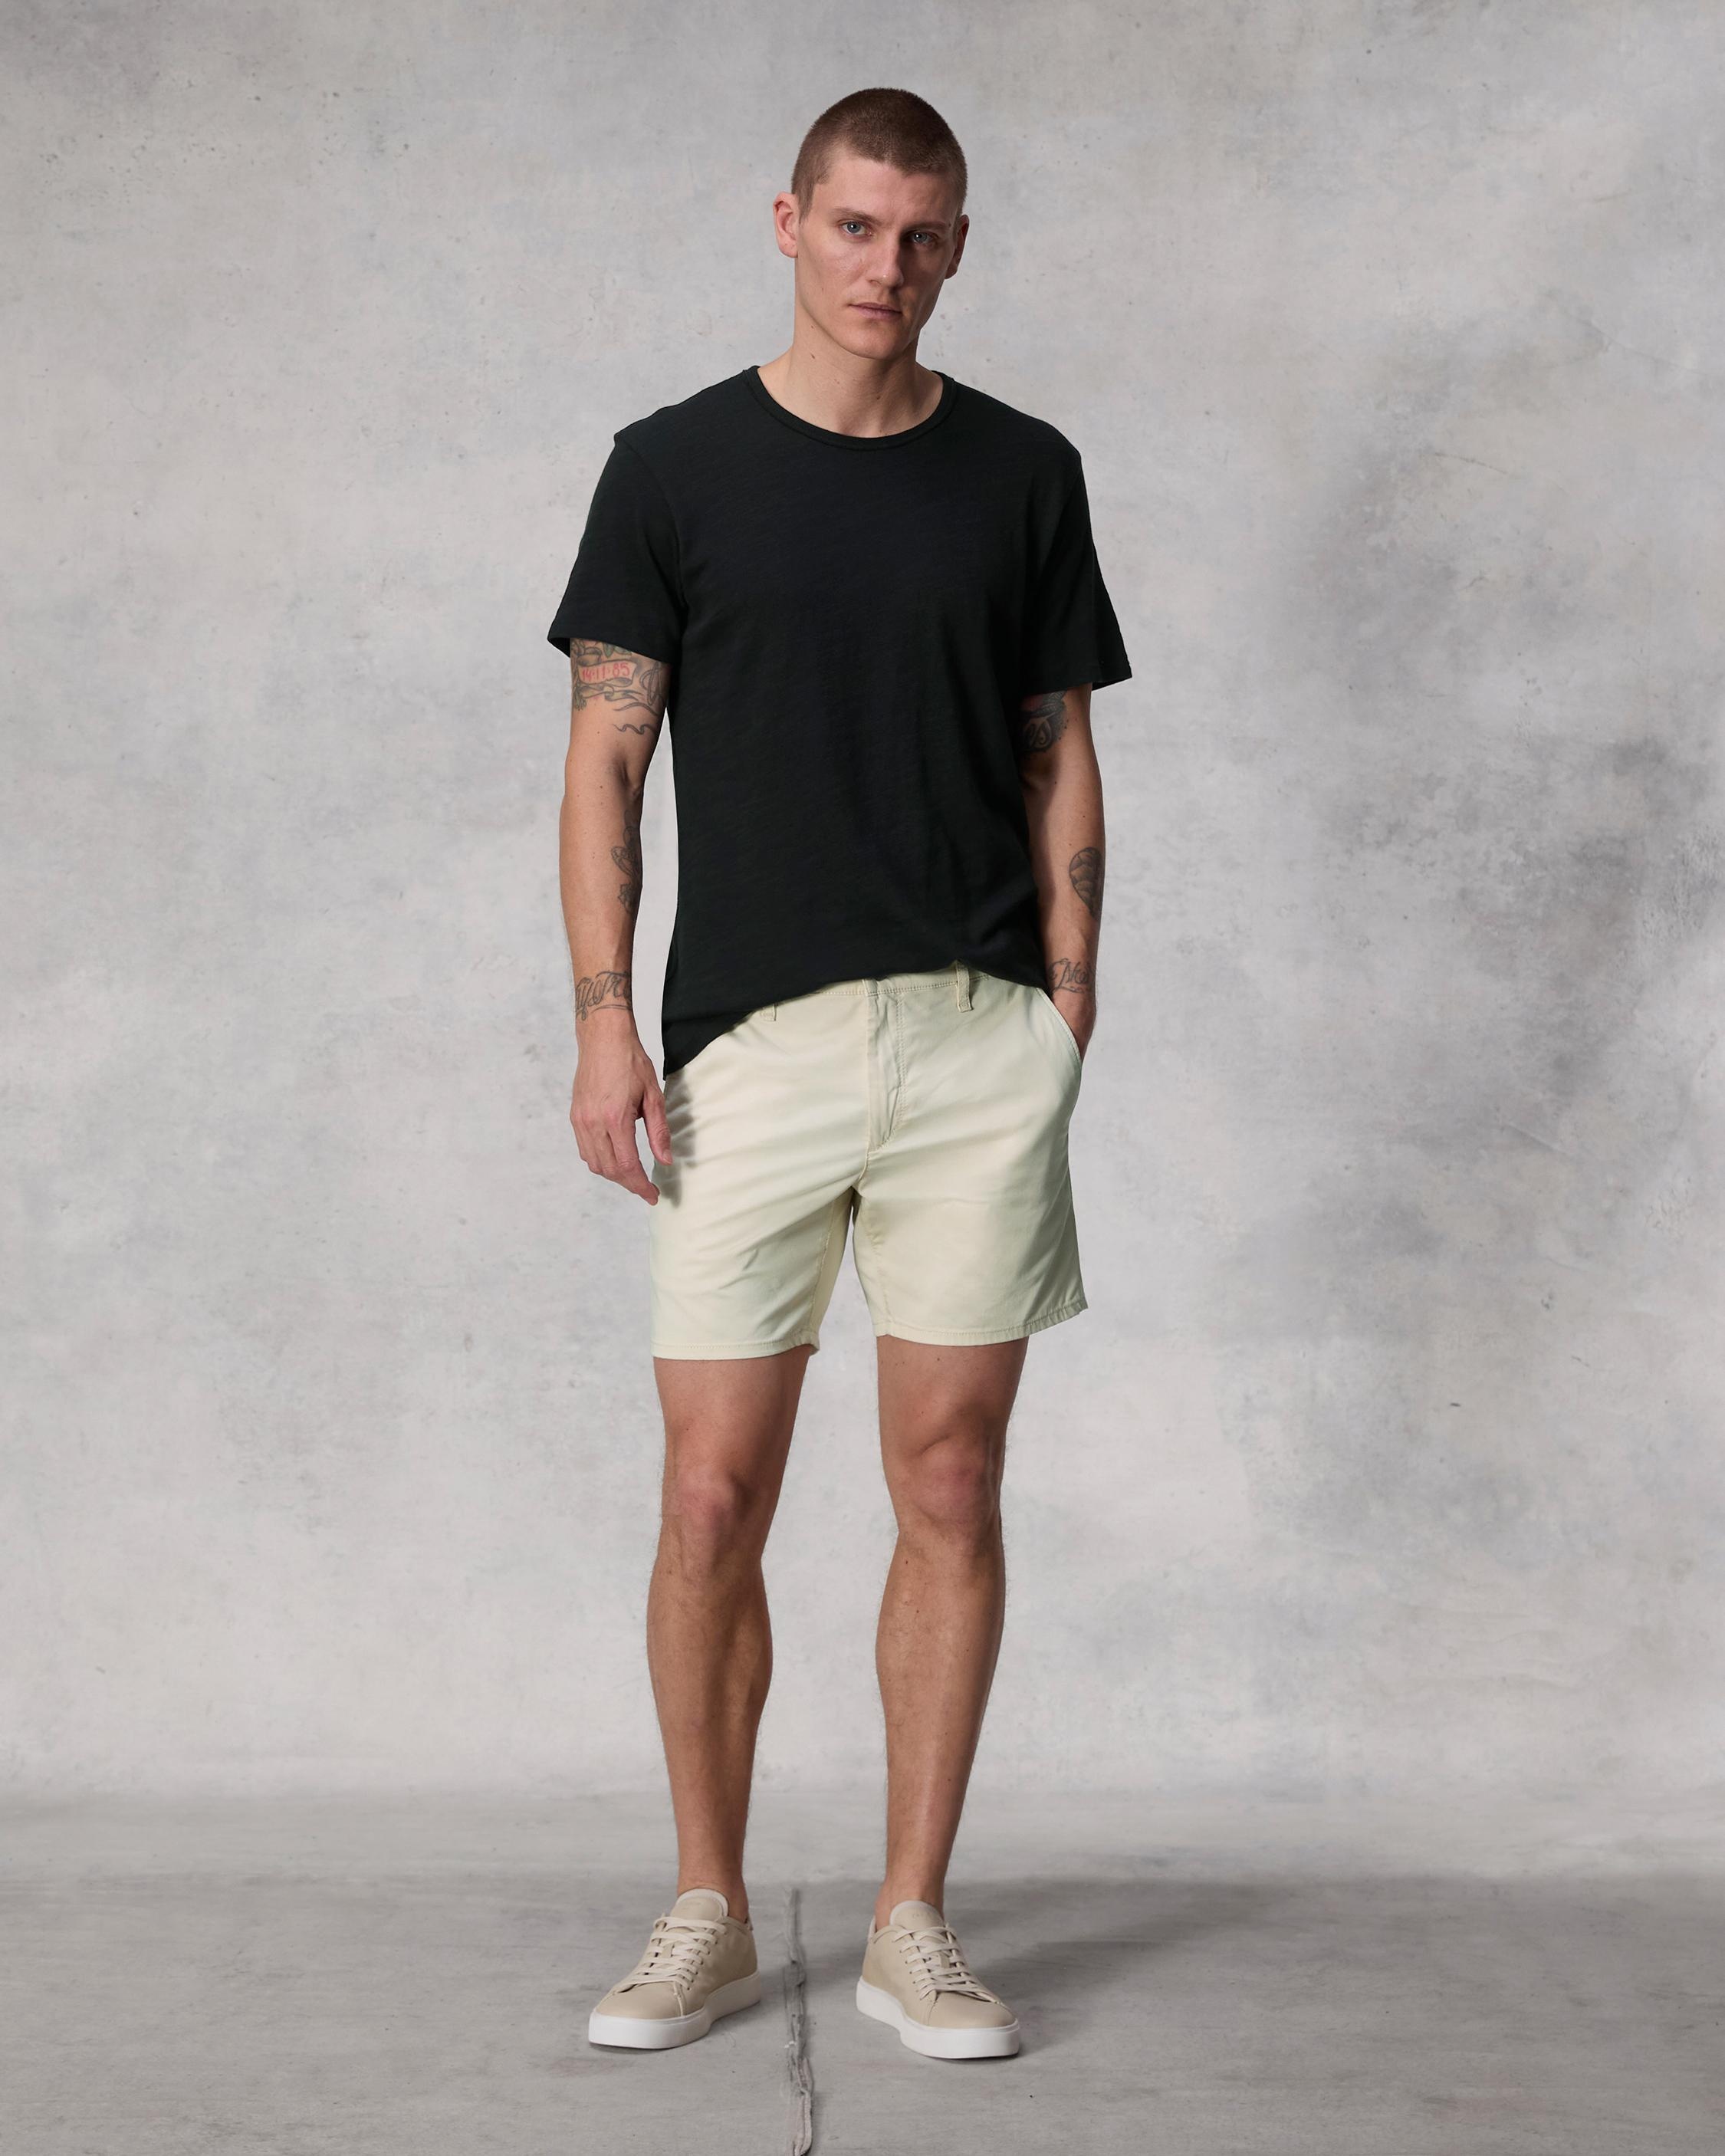 Standard Cotton Chino Short
Classic Fit - 2